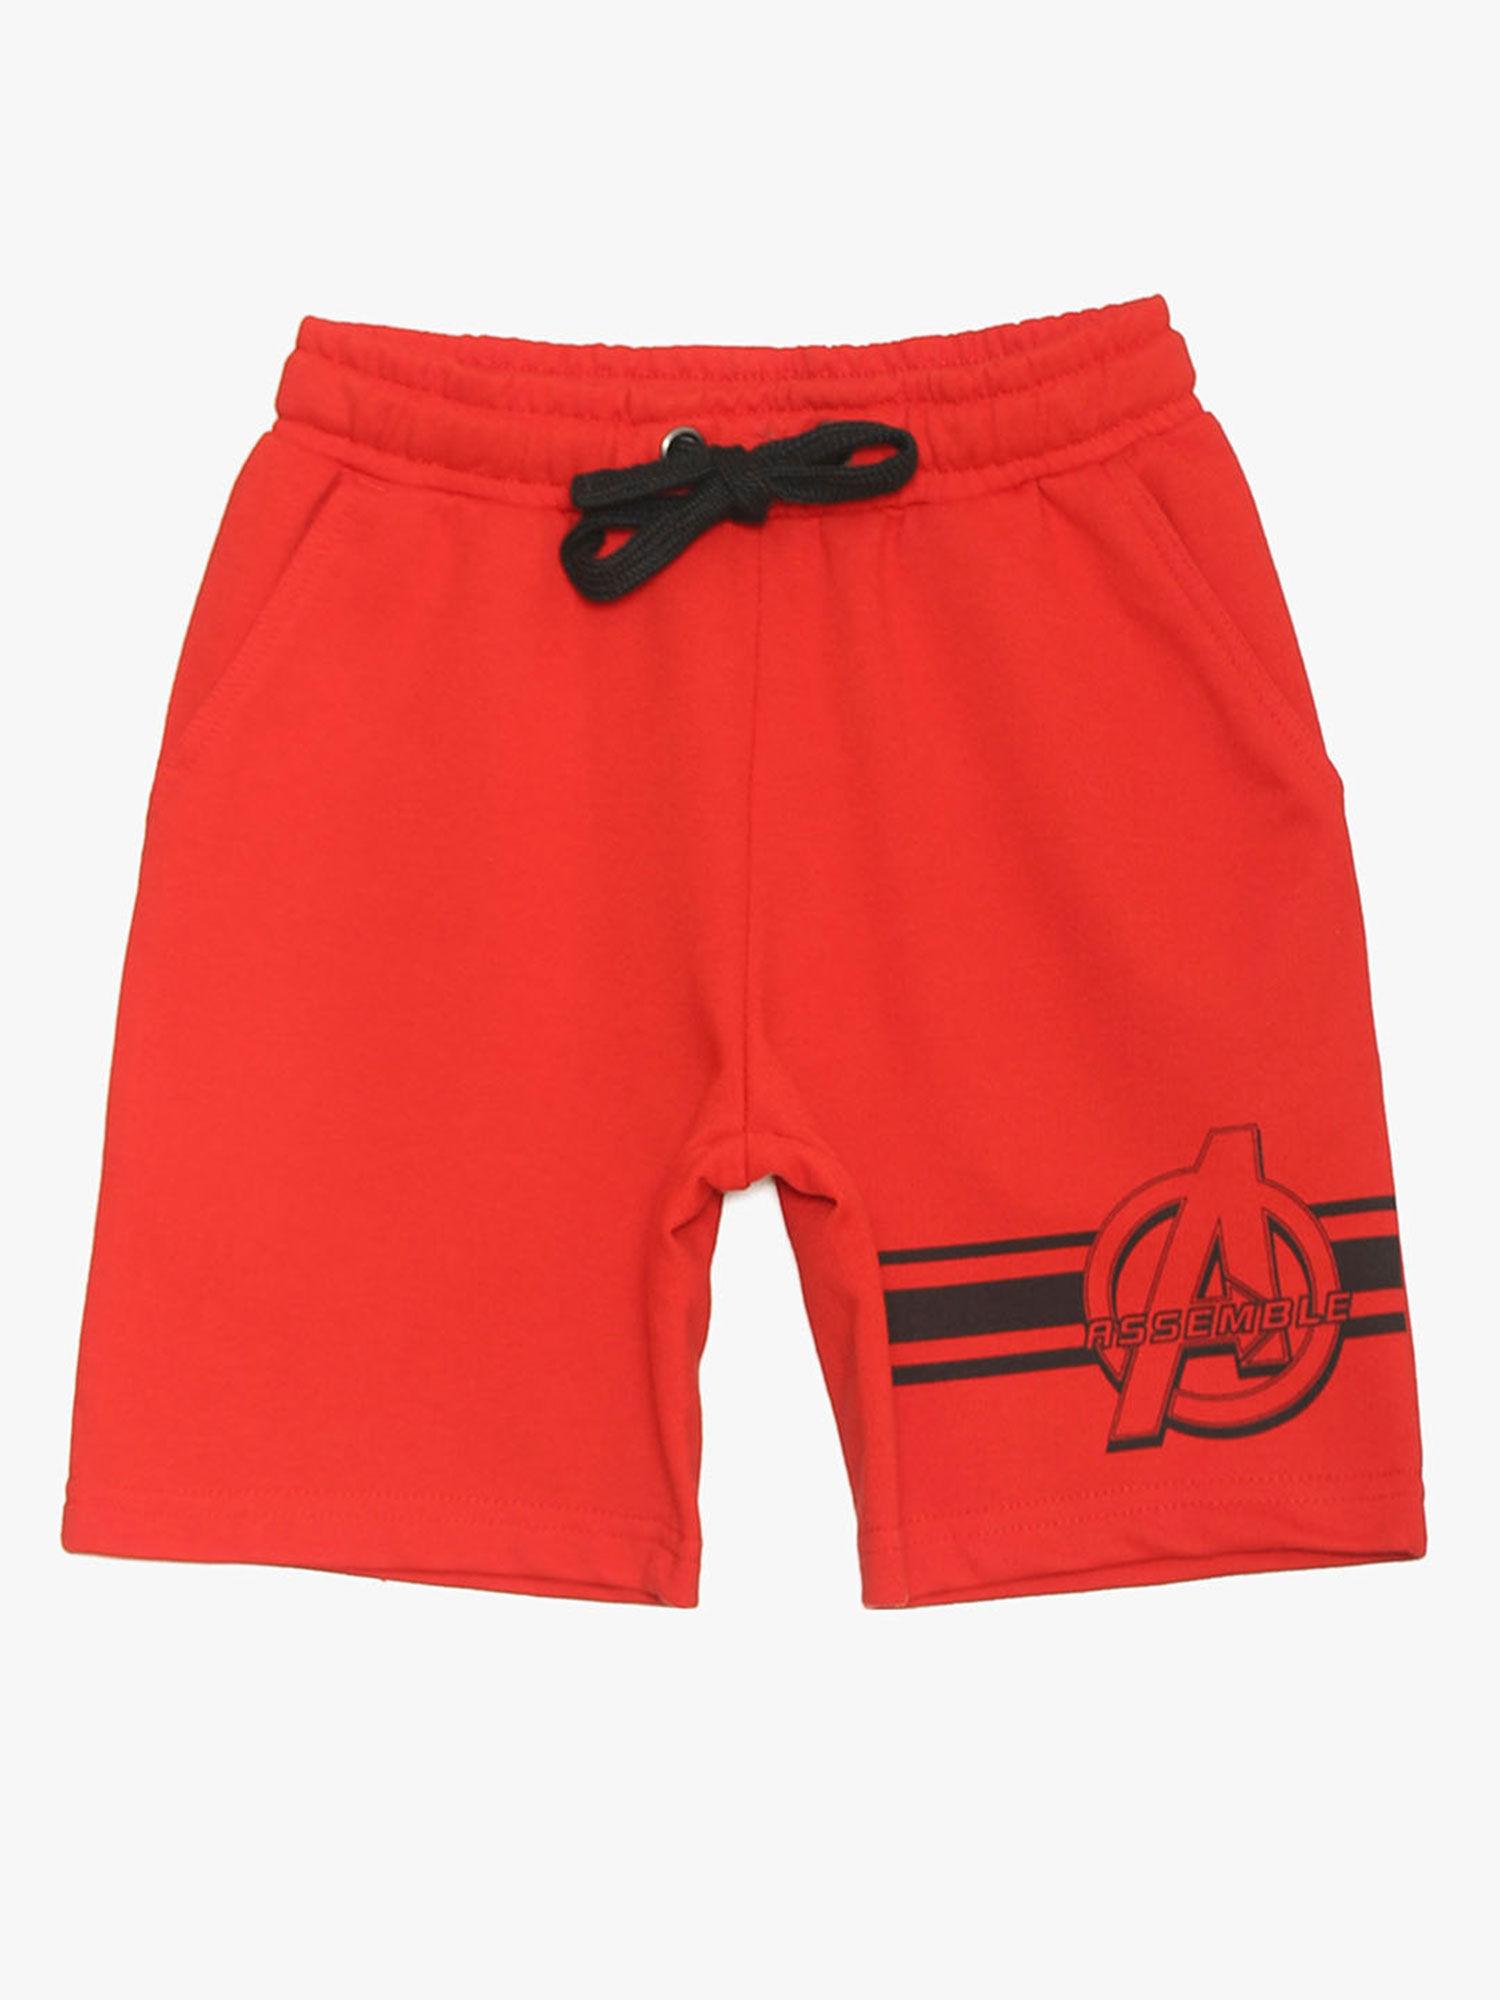 avengers-red-shorts